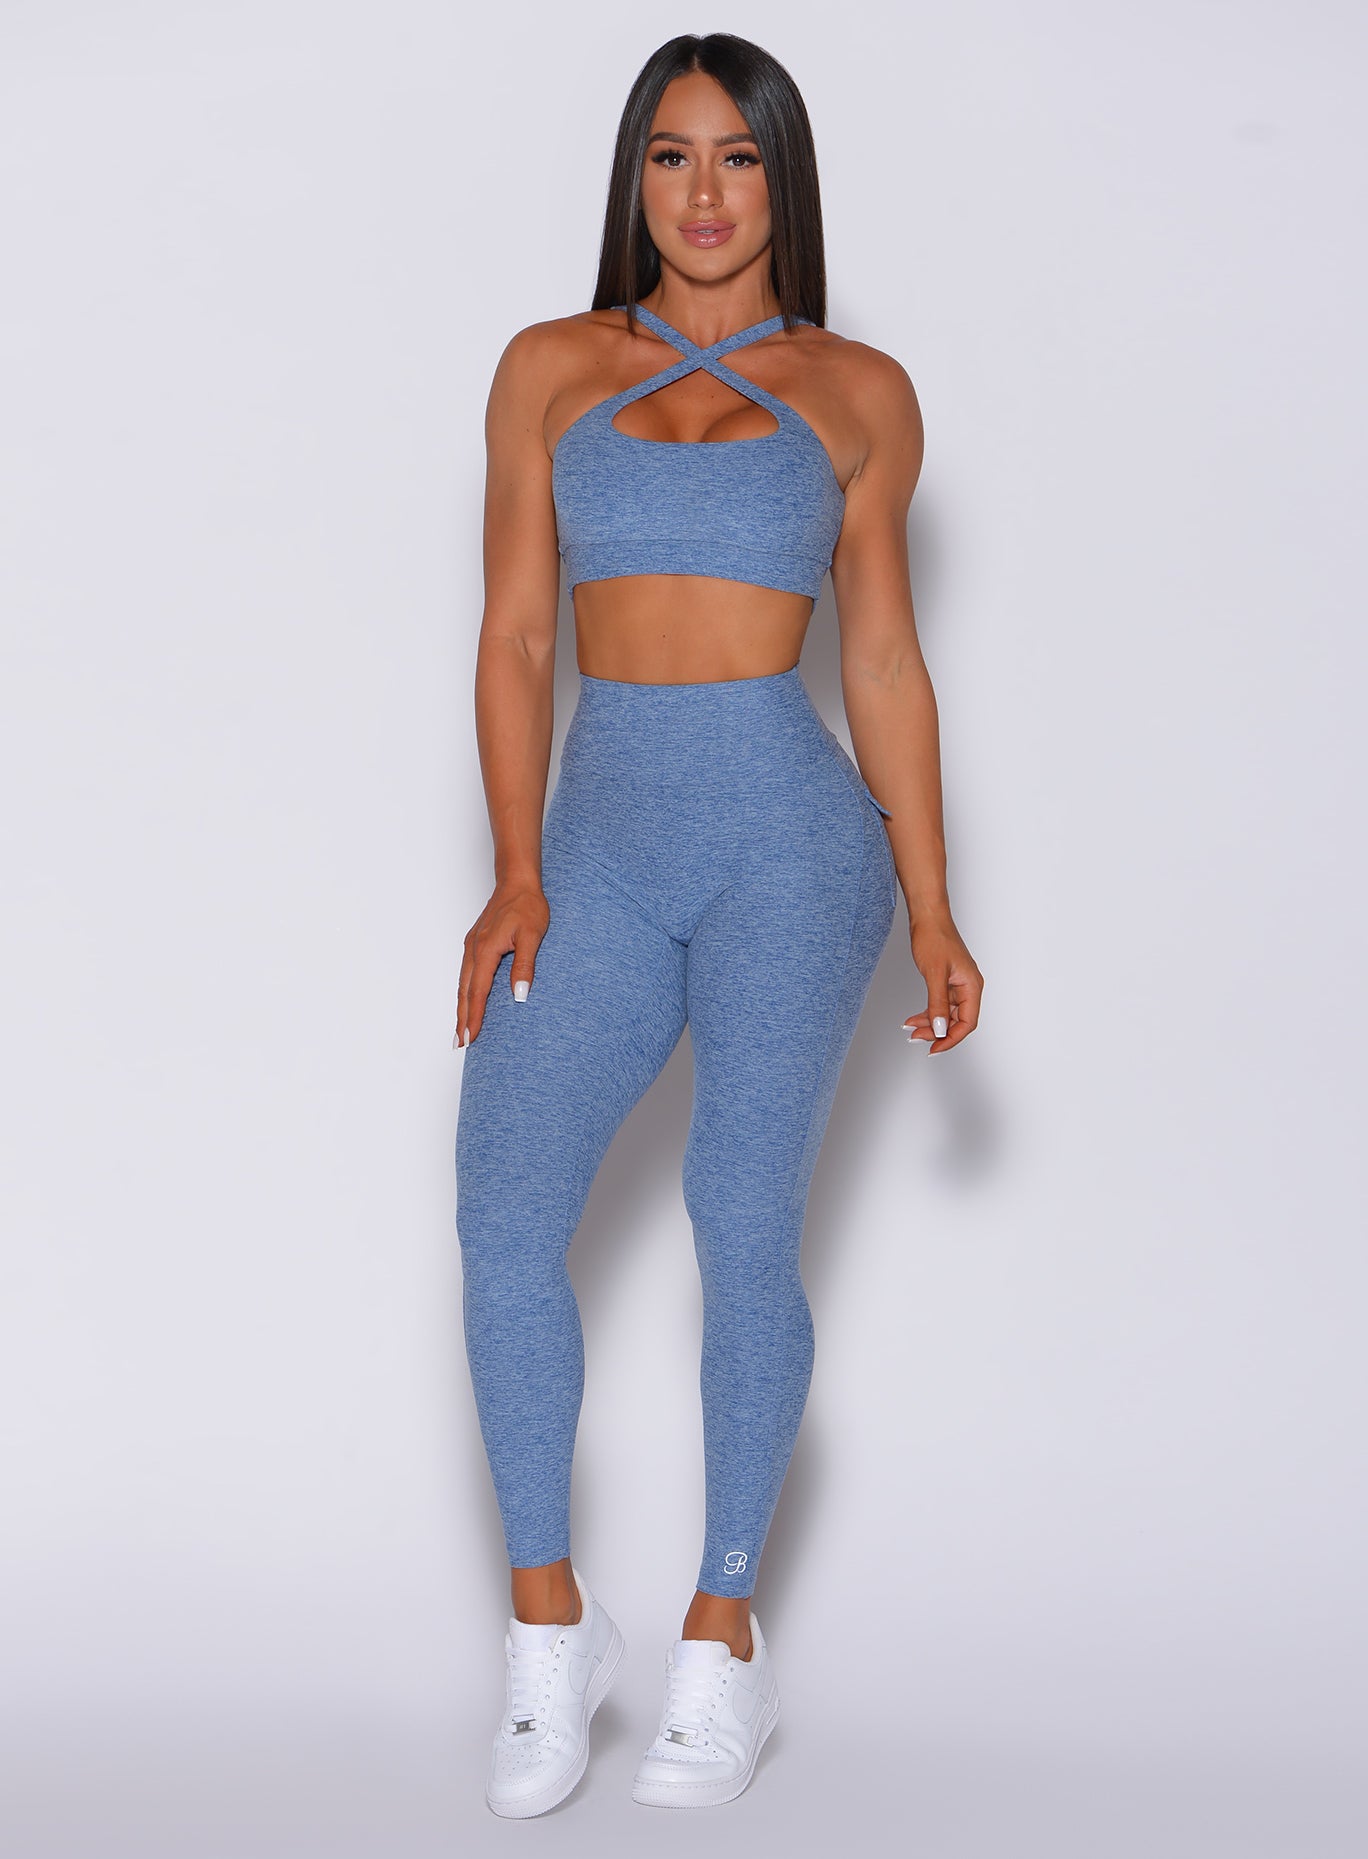 Front profile view of a model in our Pocket Pop Leggings in sky blue color and a matching sports bra